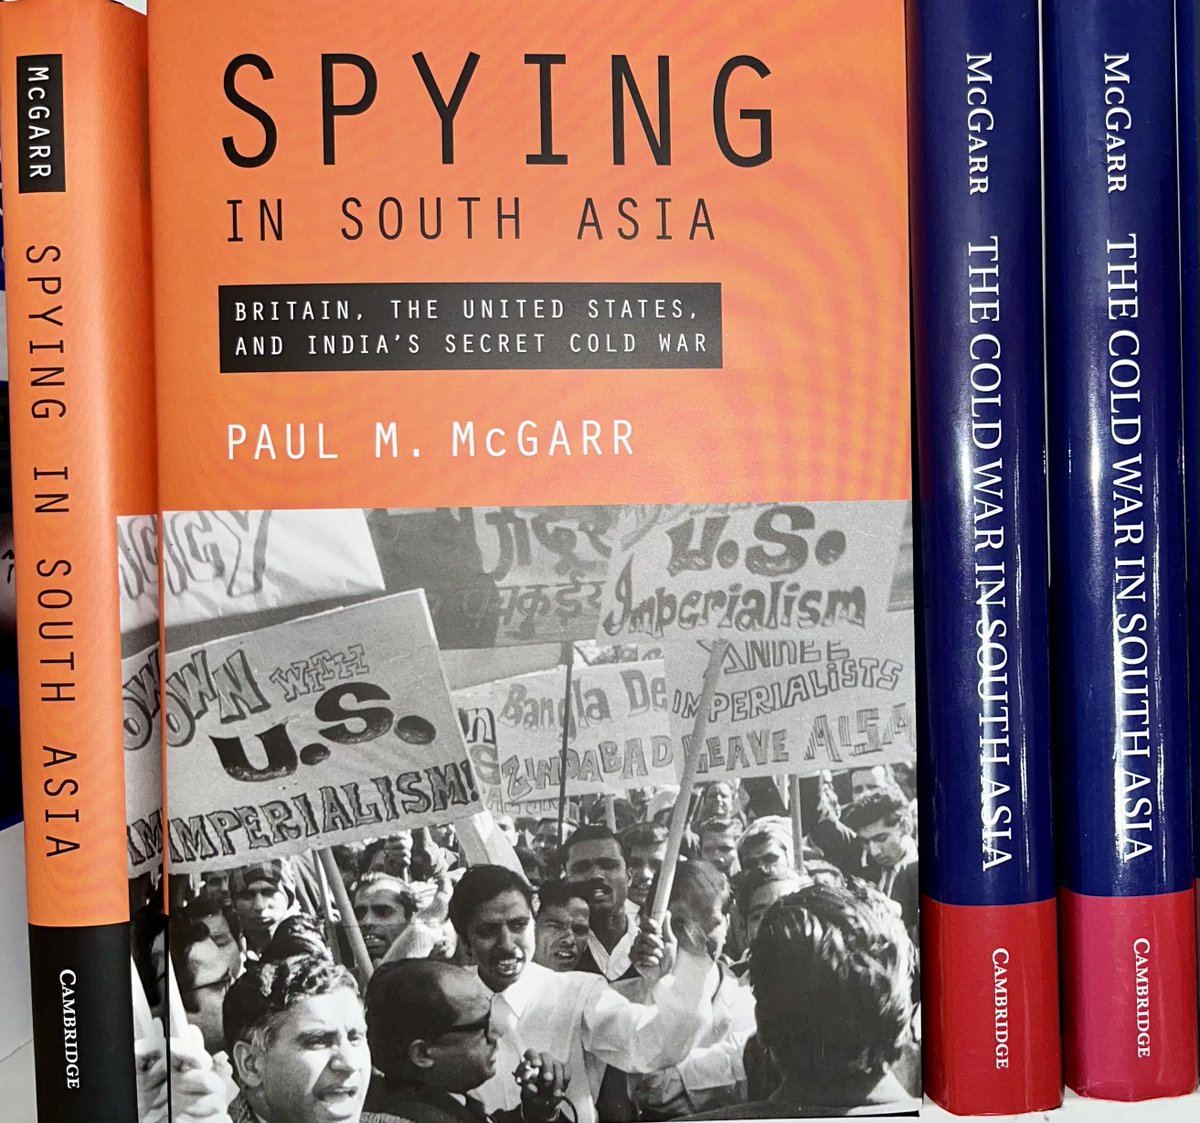 Thanks @CambridgeUP for doing such a fantatstic job with Spying in South Asia. Always a thrill to hold a physical copy of your book. And this one is a steal at £30. Available now to pre-order. There's a great companion volume too 🙂 @kclintelligence @warstudies